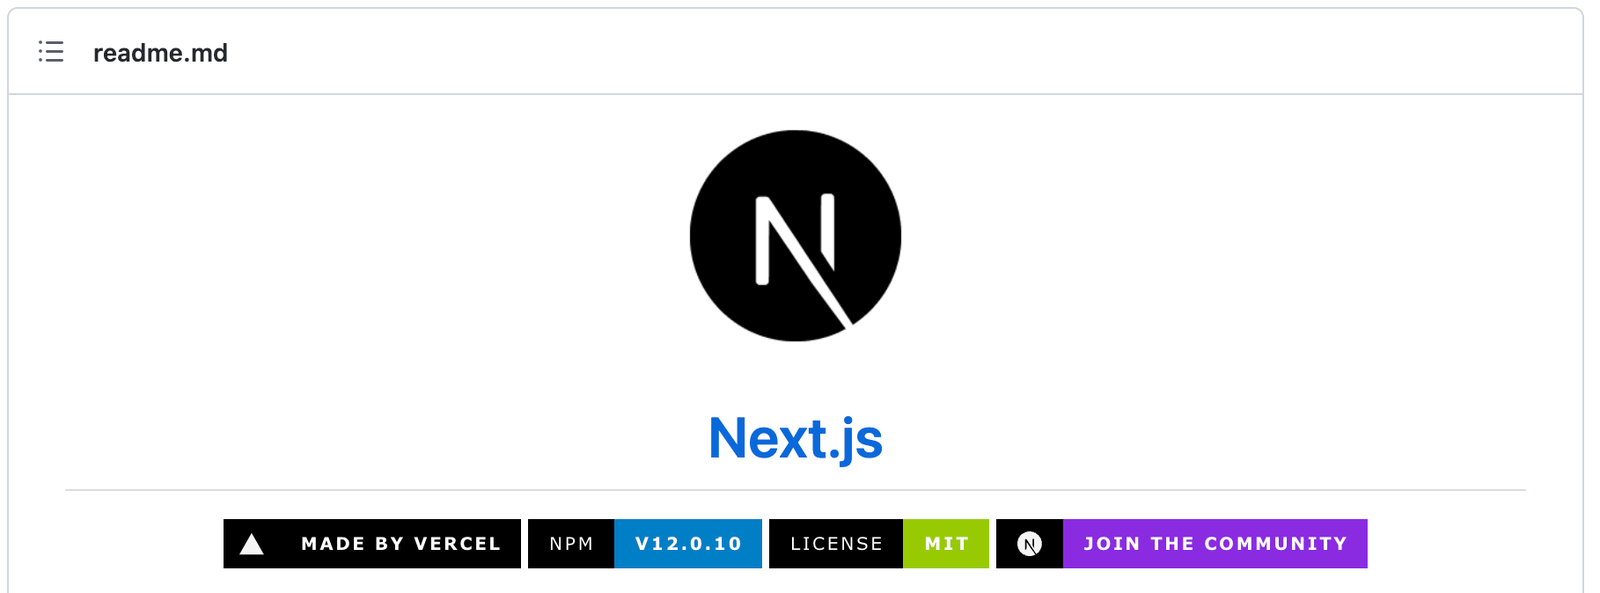 Showing the Next.js repo header with GitHub badges.